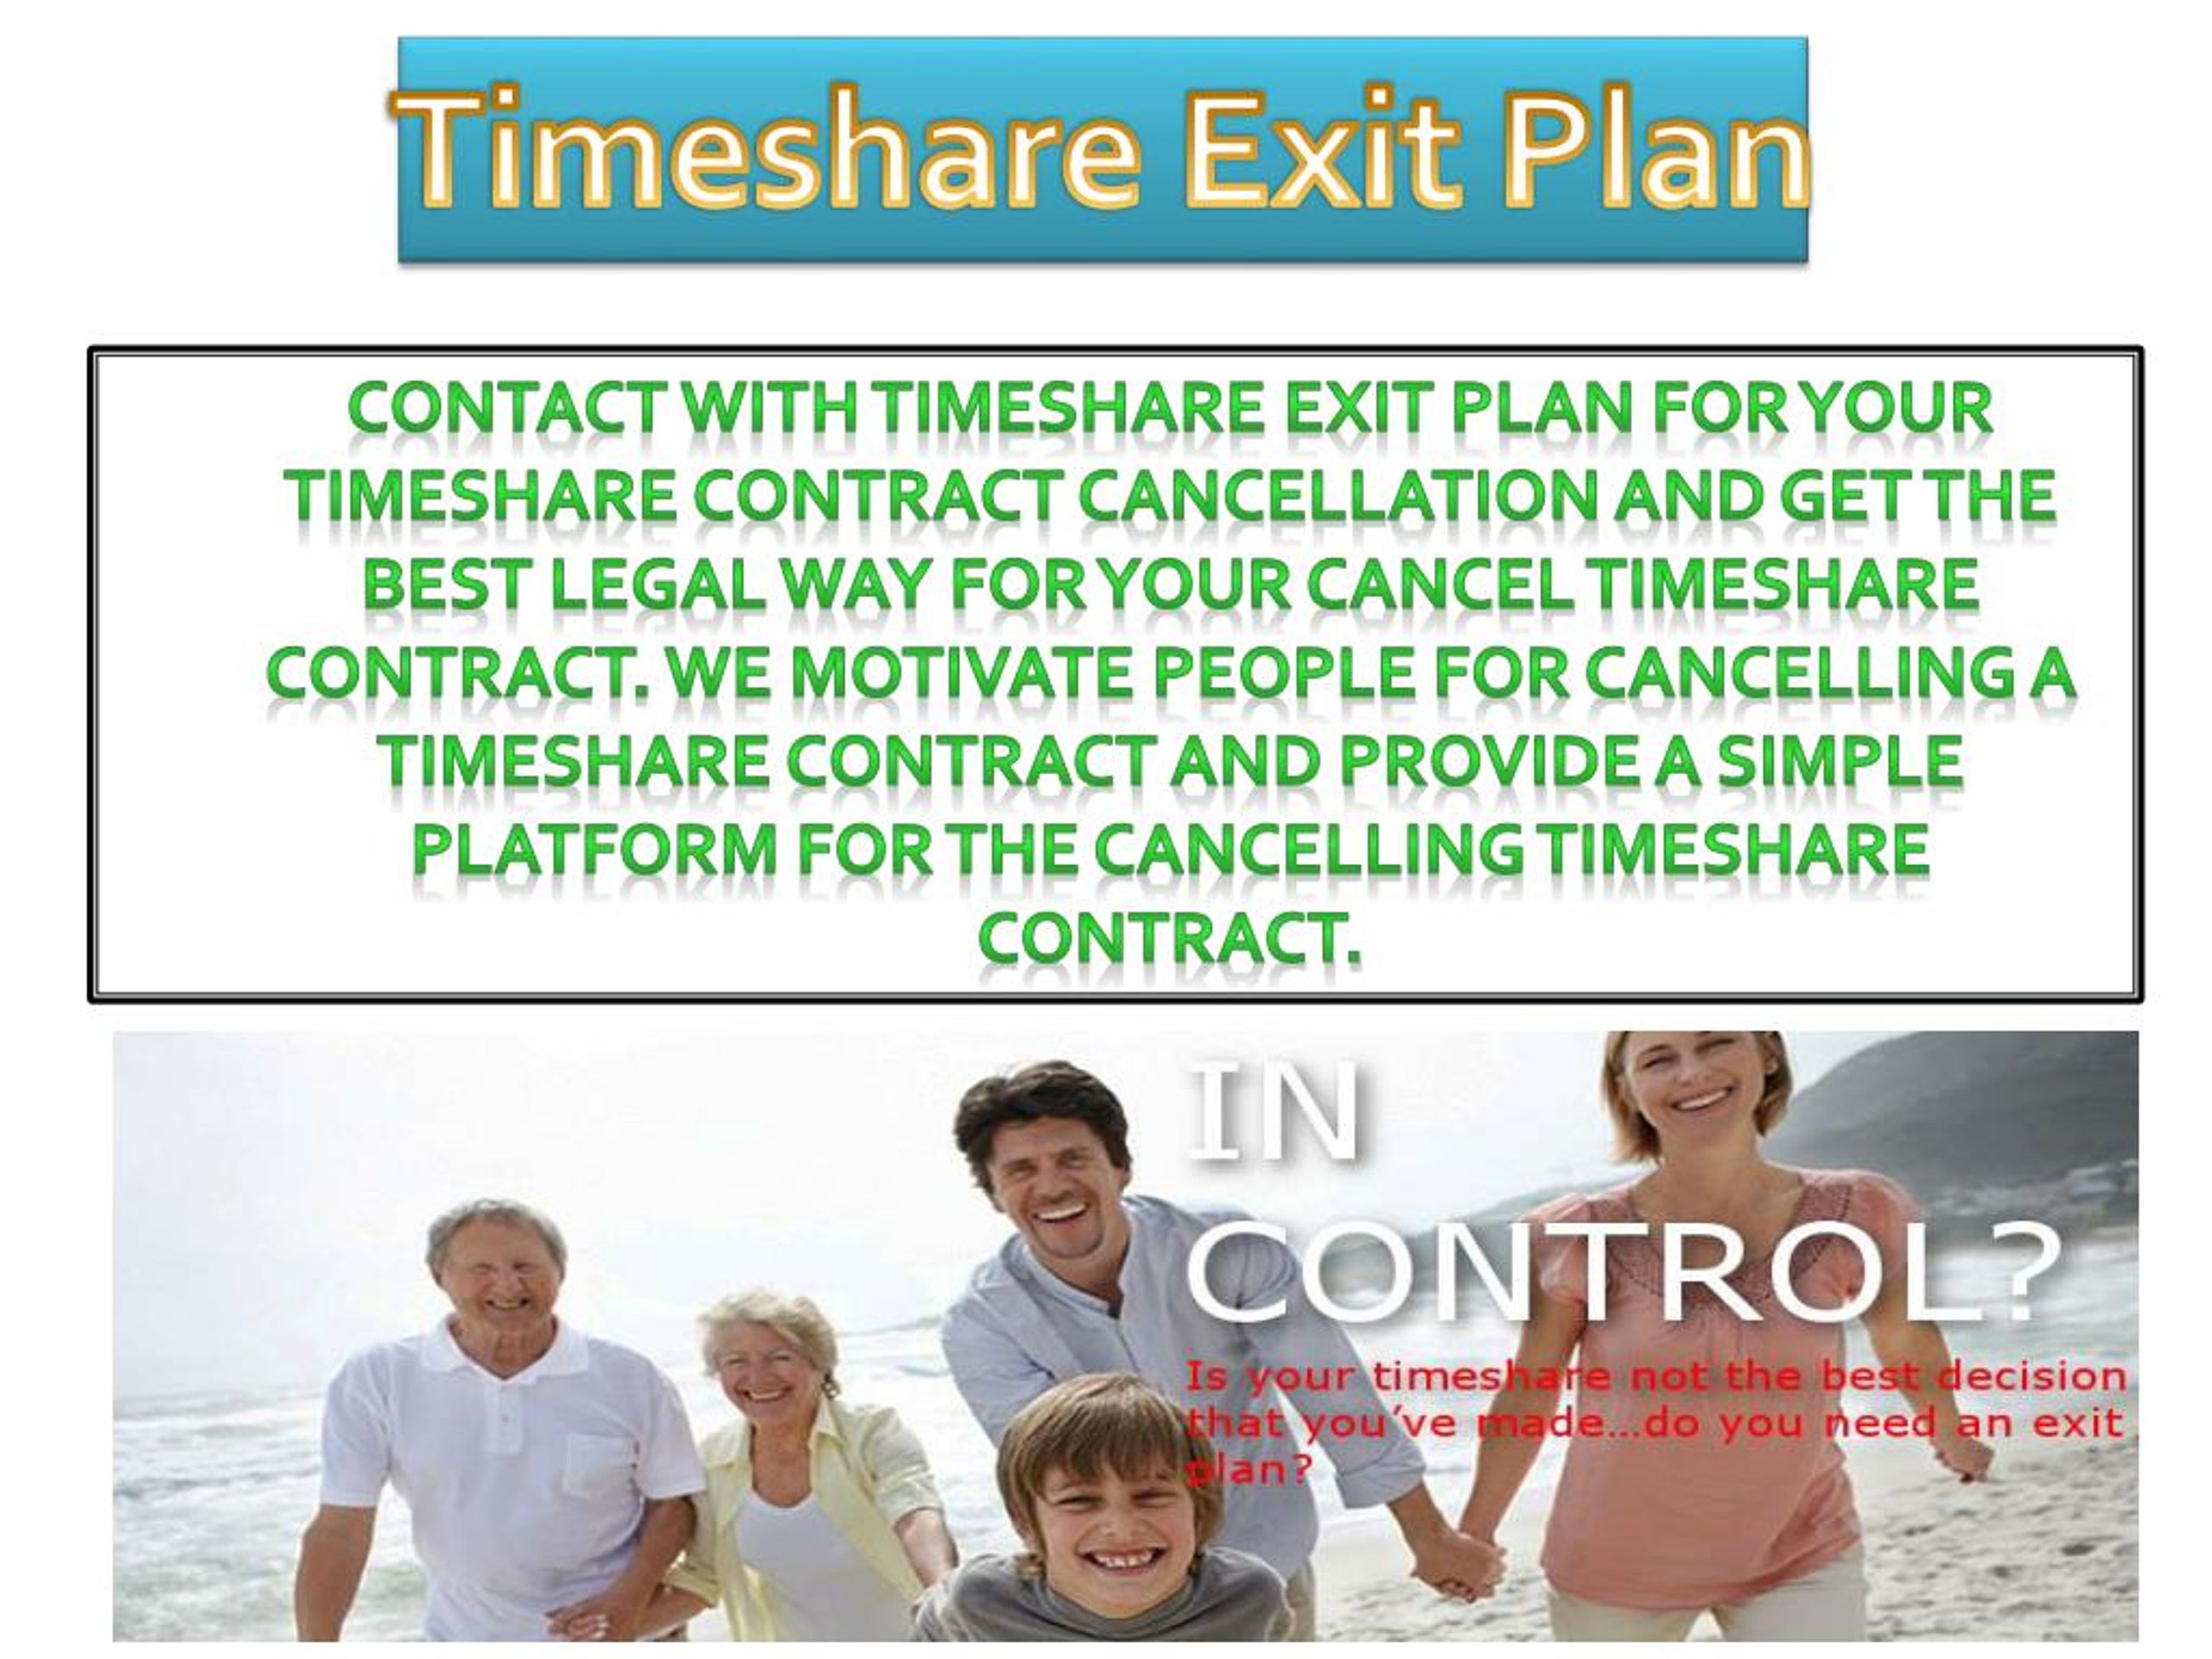 how to leave a timeshare presentation